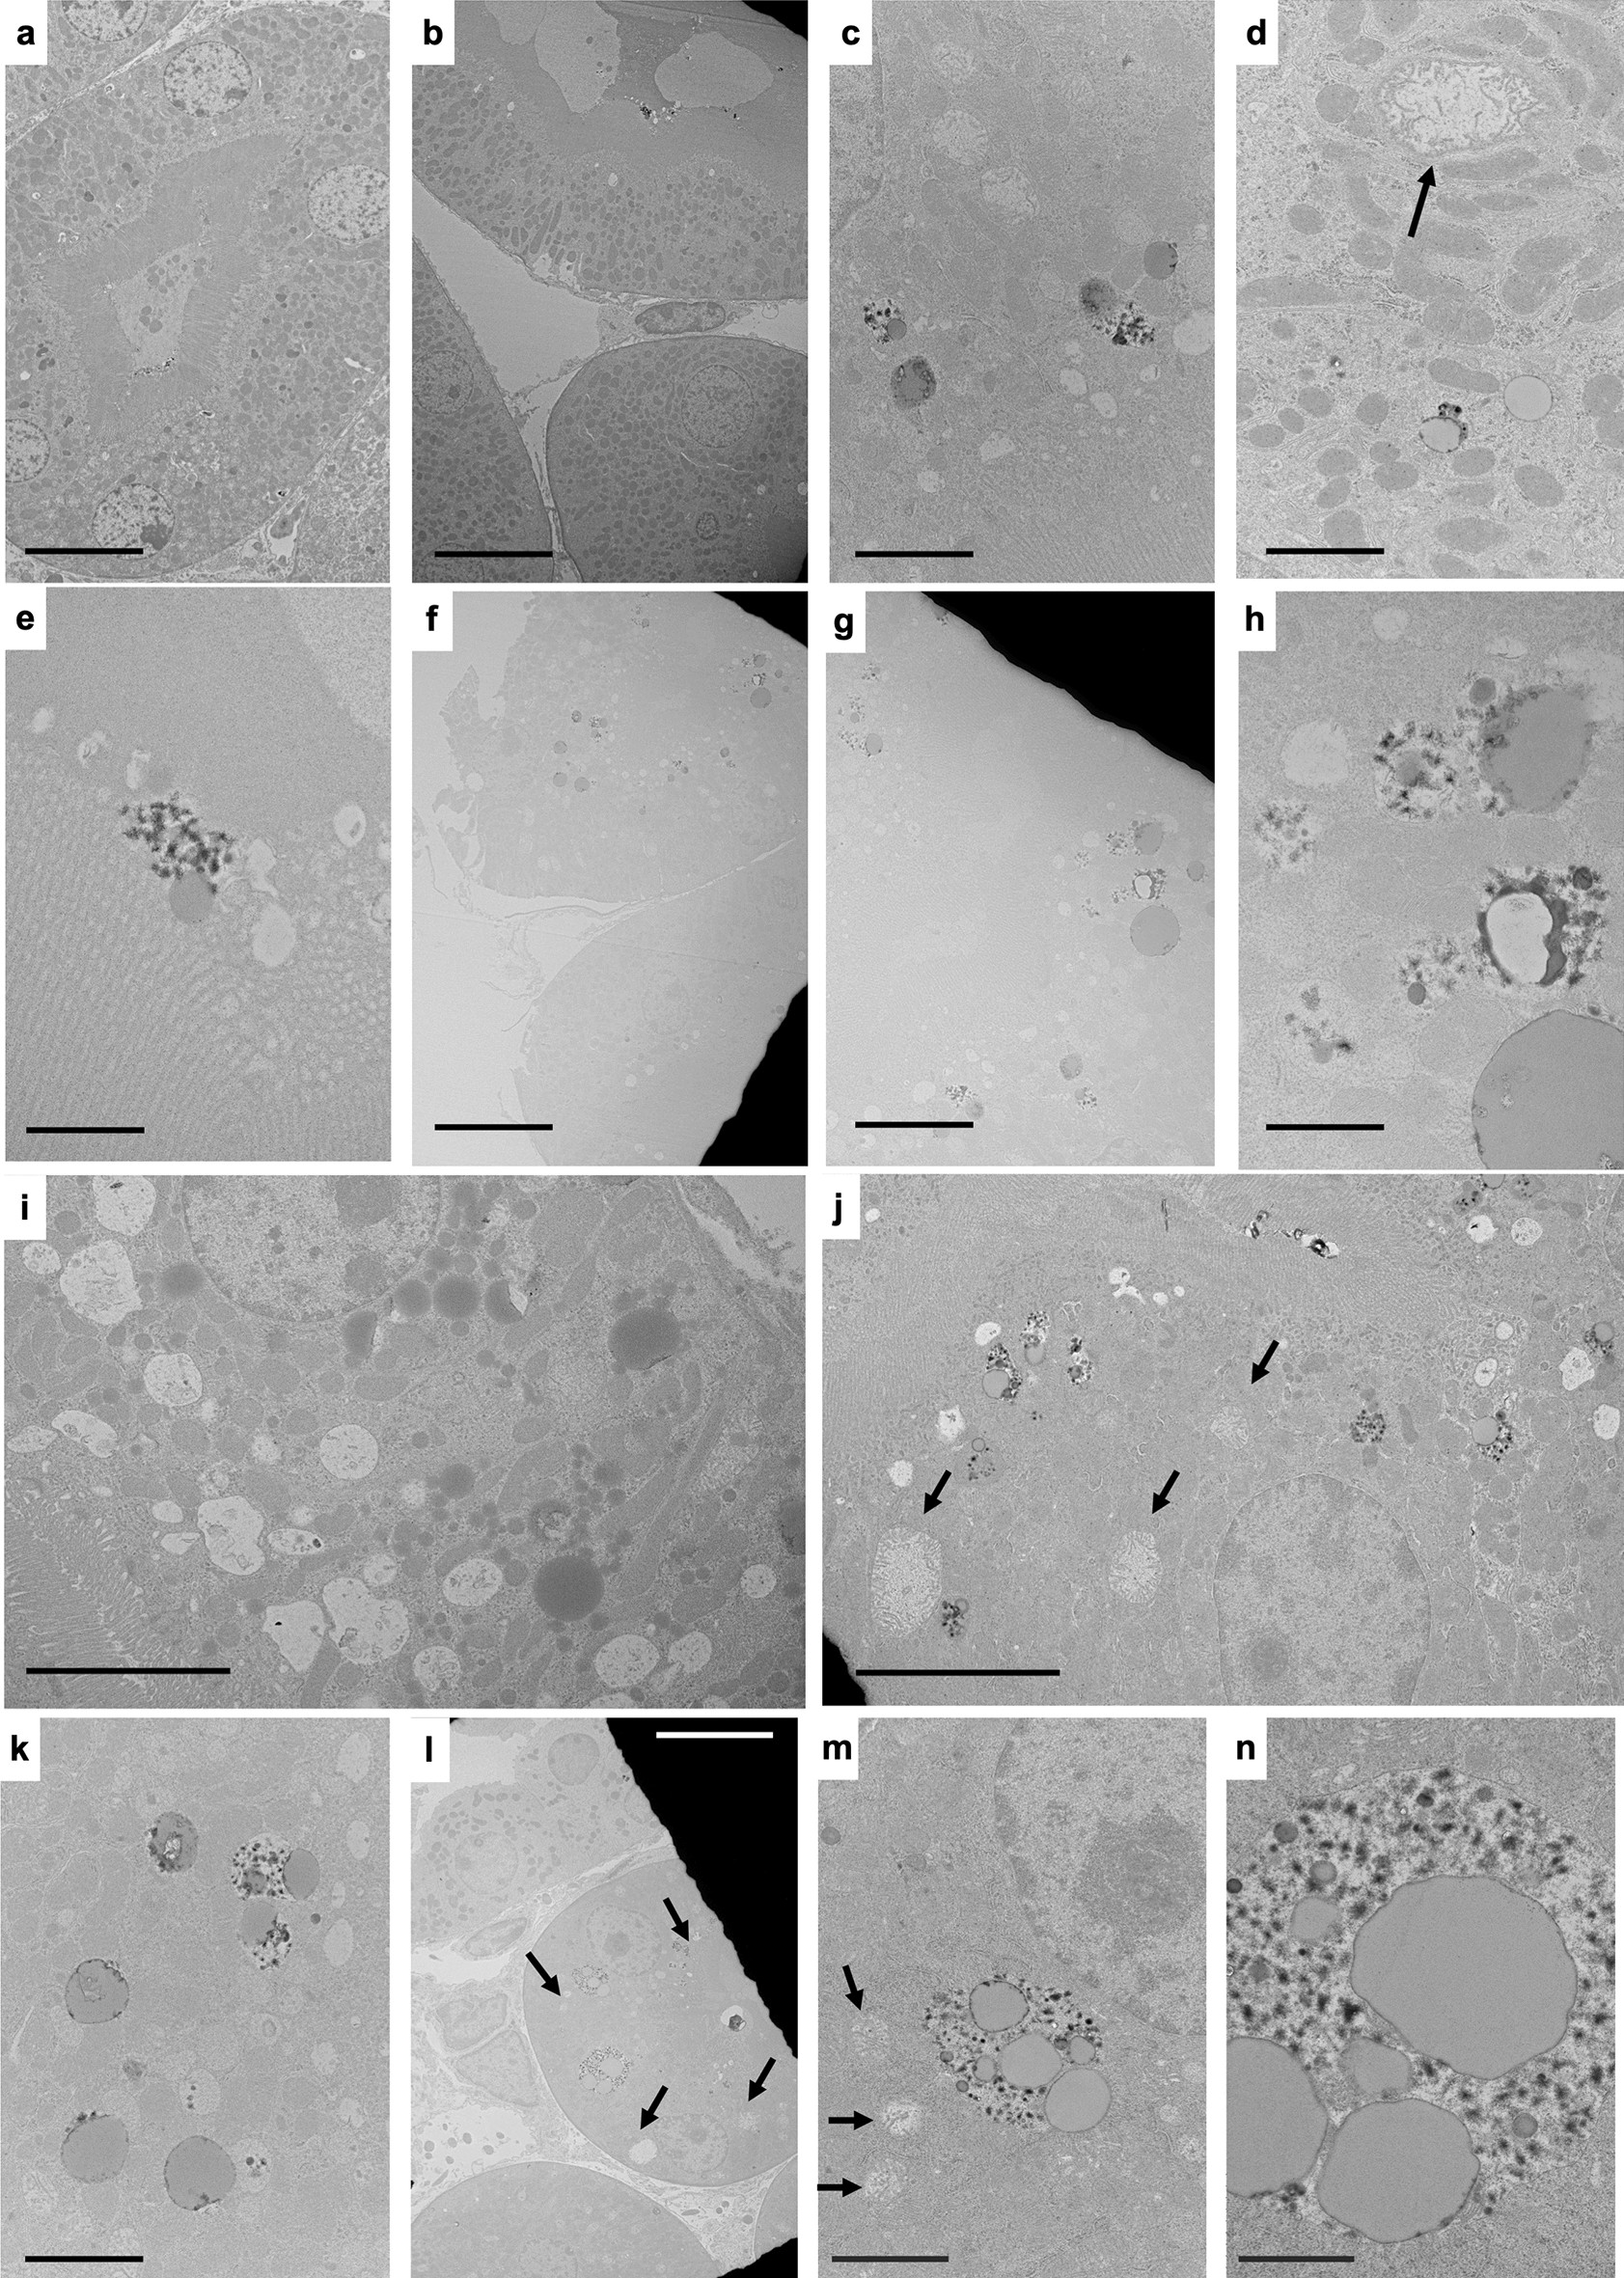 Micrographs of low, medium and high carbon steel a, e, i Untreated, b